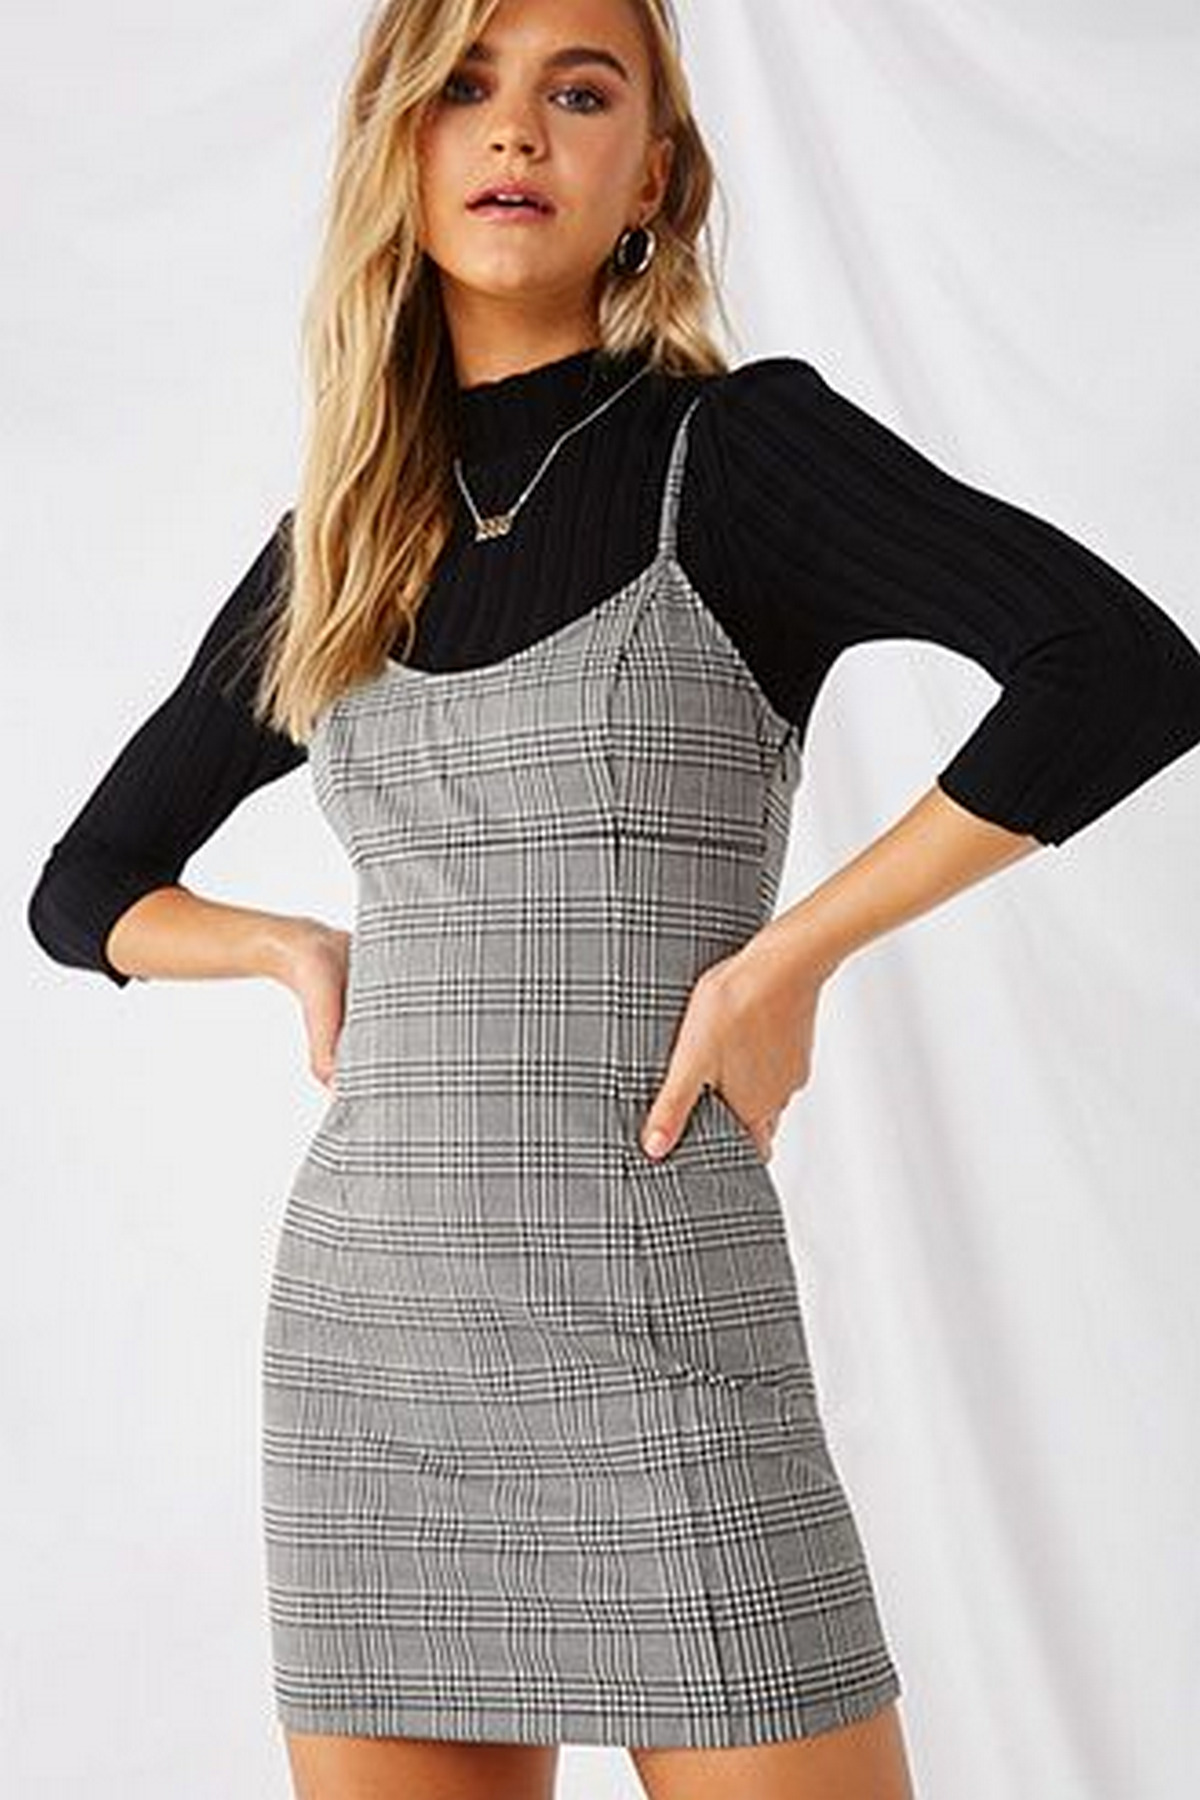  Camisole Dress And Long-Sleeve Shirt